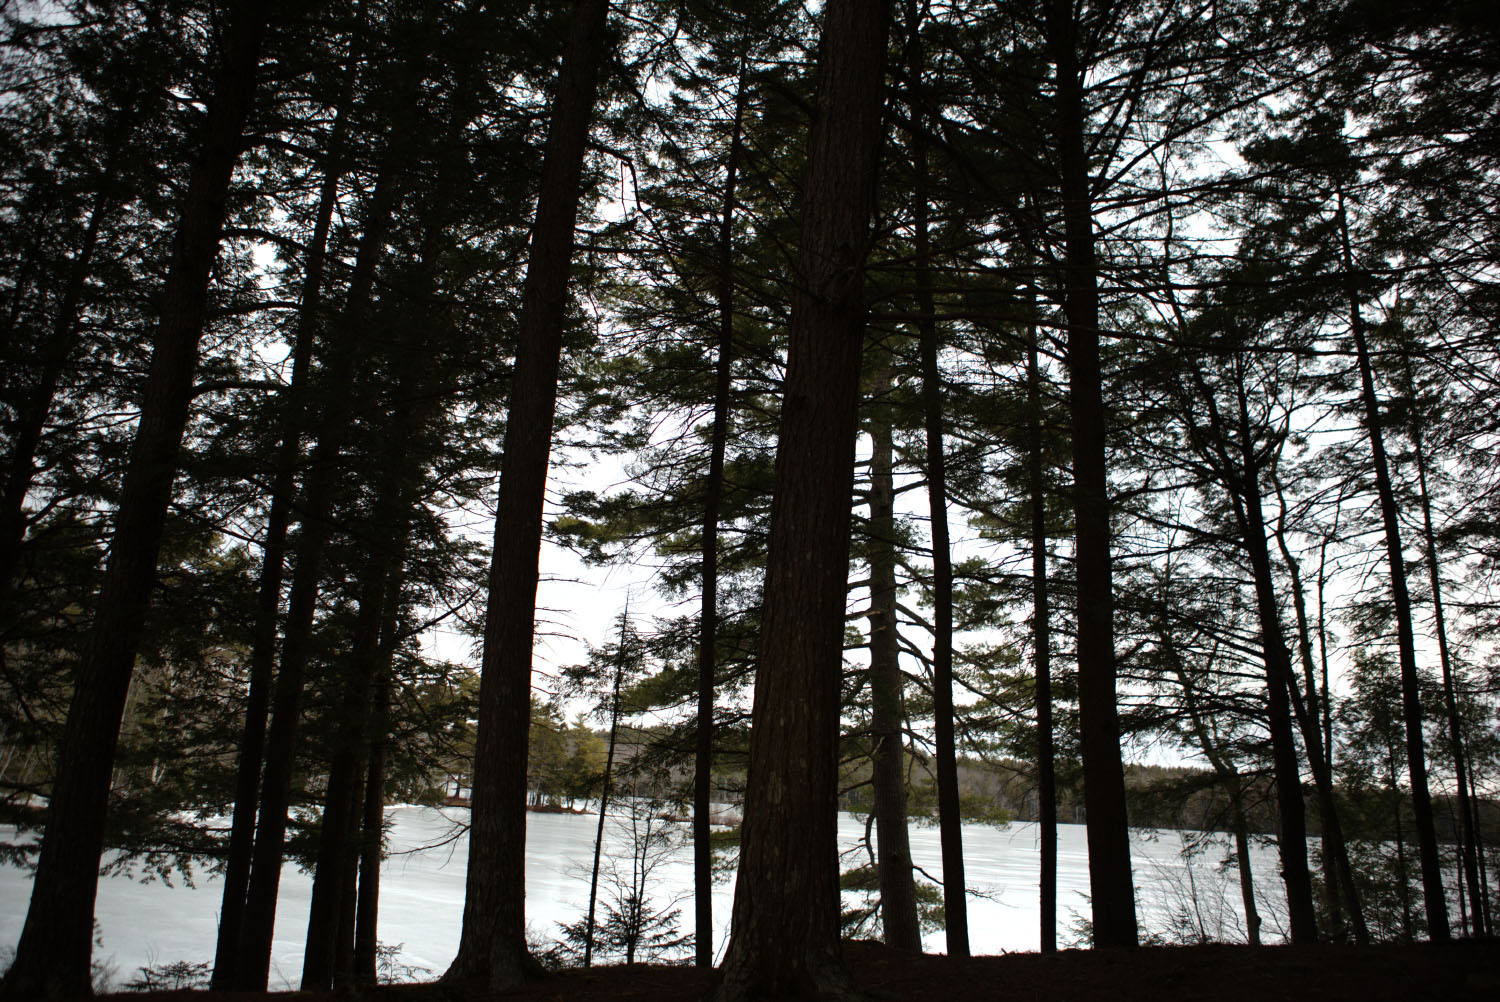 Pine trees in front of a lake